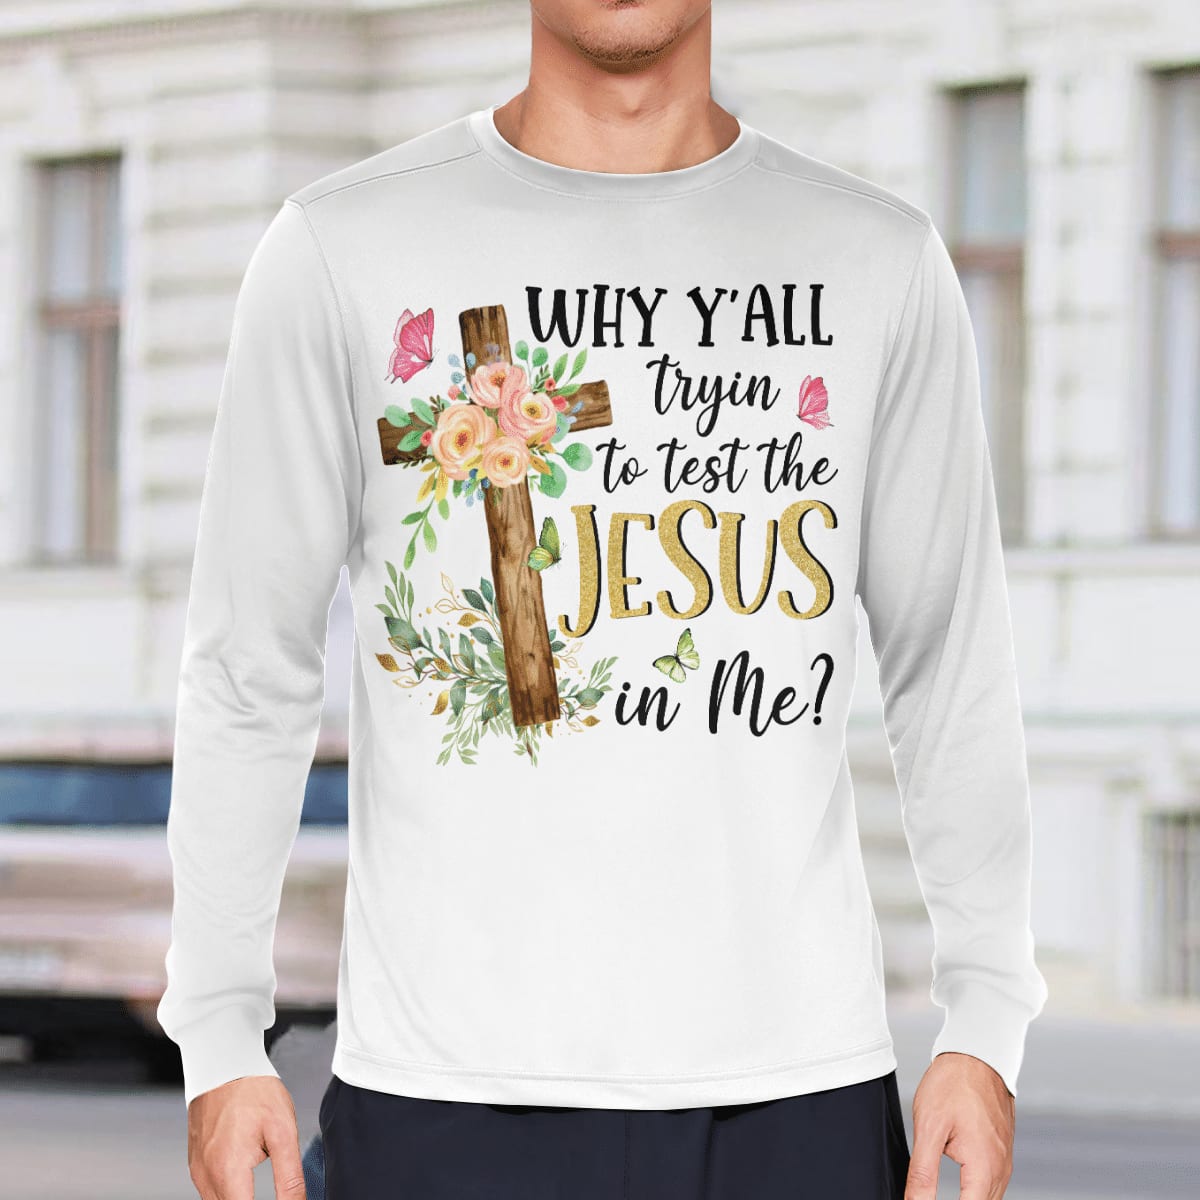 Why Y'all Tryin To Test The Jesus In Me, Christian T-Shirt, Religious T-Shirt, Jesus Sweatshirt Hoodie, God T-Shirt